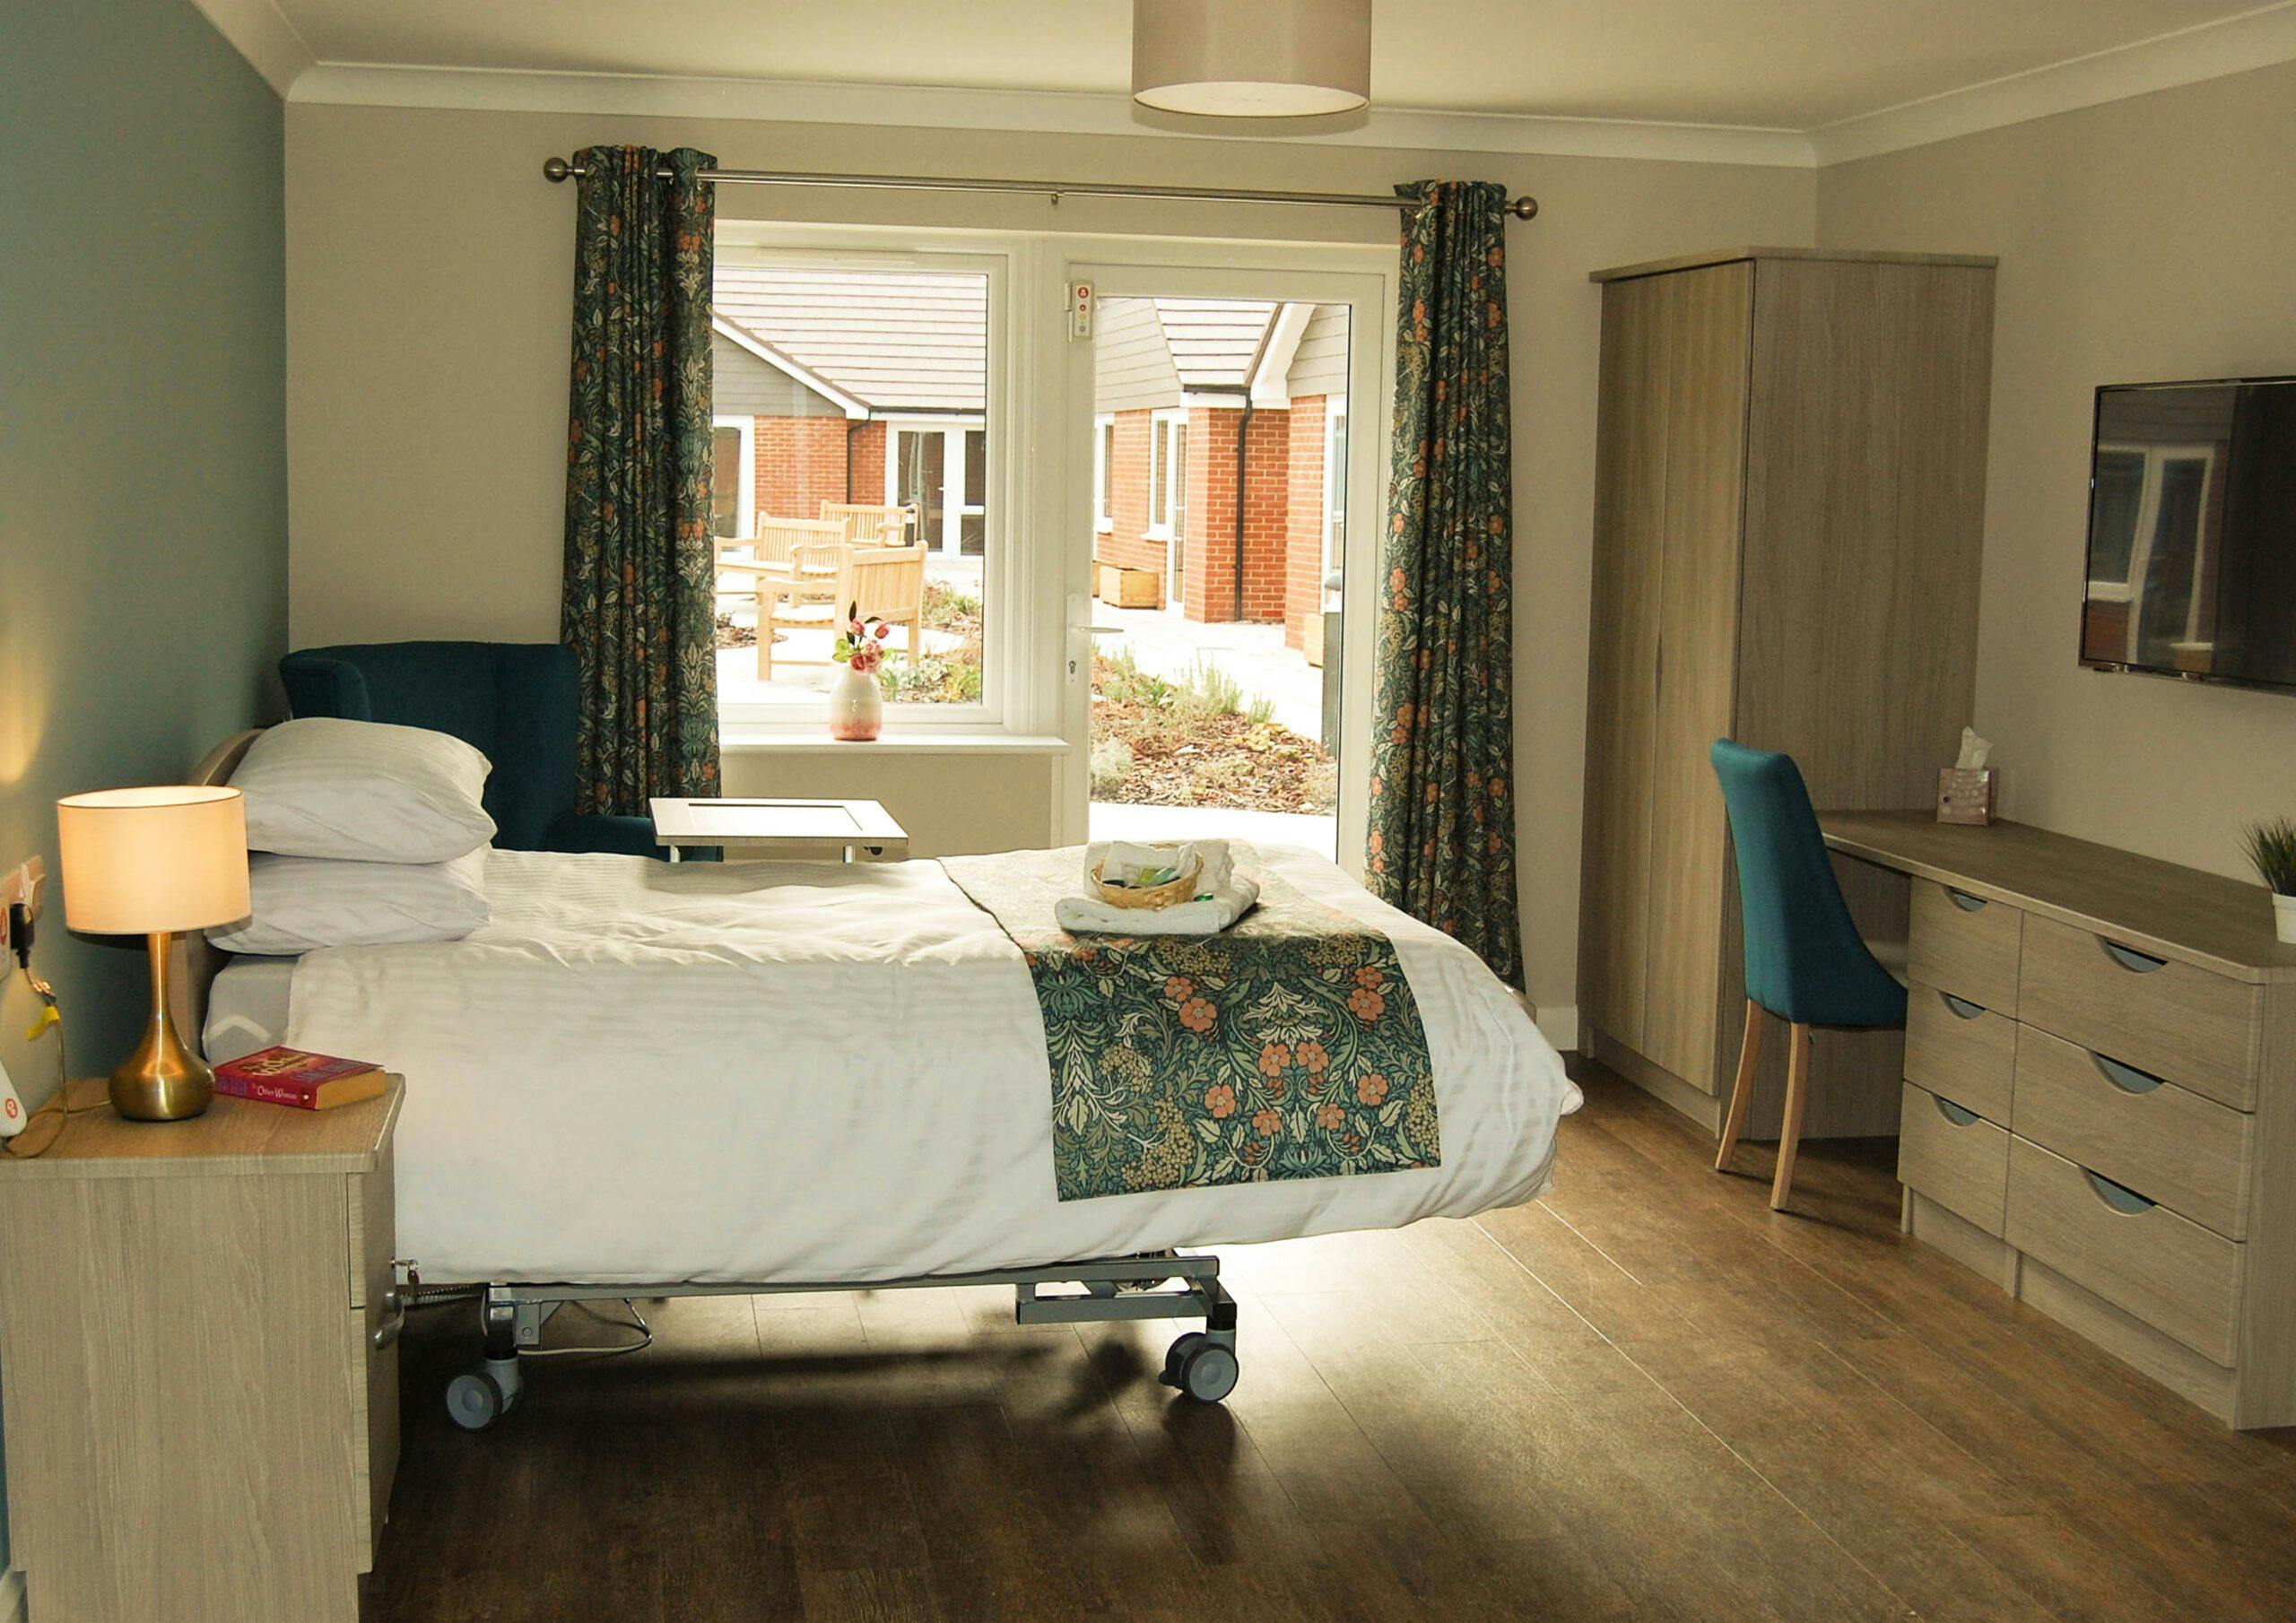 Bedroom of Thimbleby Court care home in Horncastle, Lincolnshire